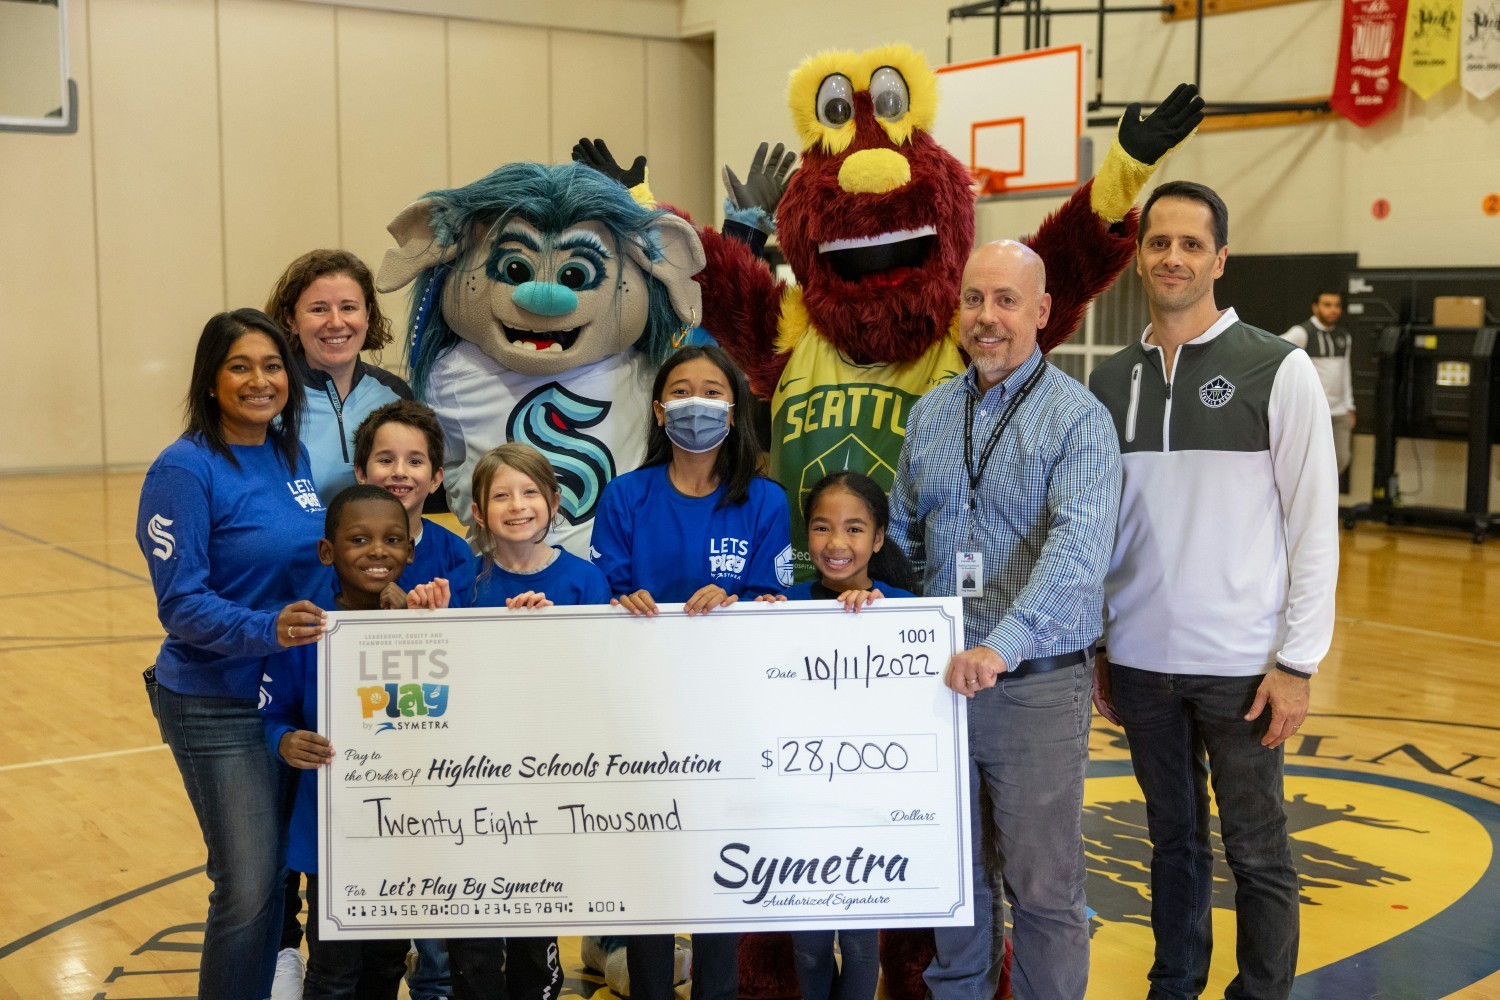 The “LETS Play by Symetra” community program helps young students build Leadership, Equity and Teamwork through Sports.